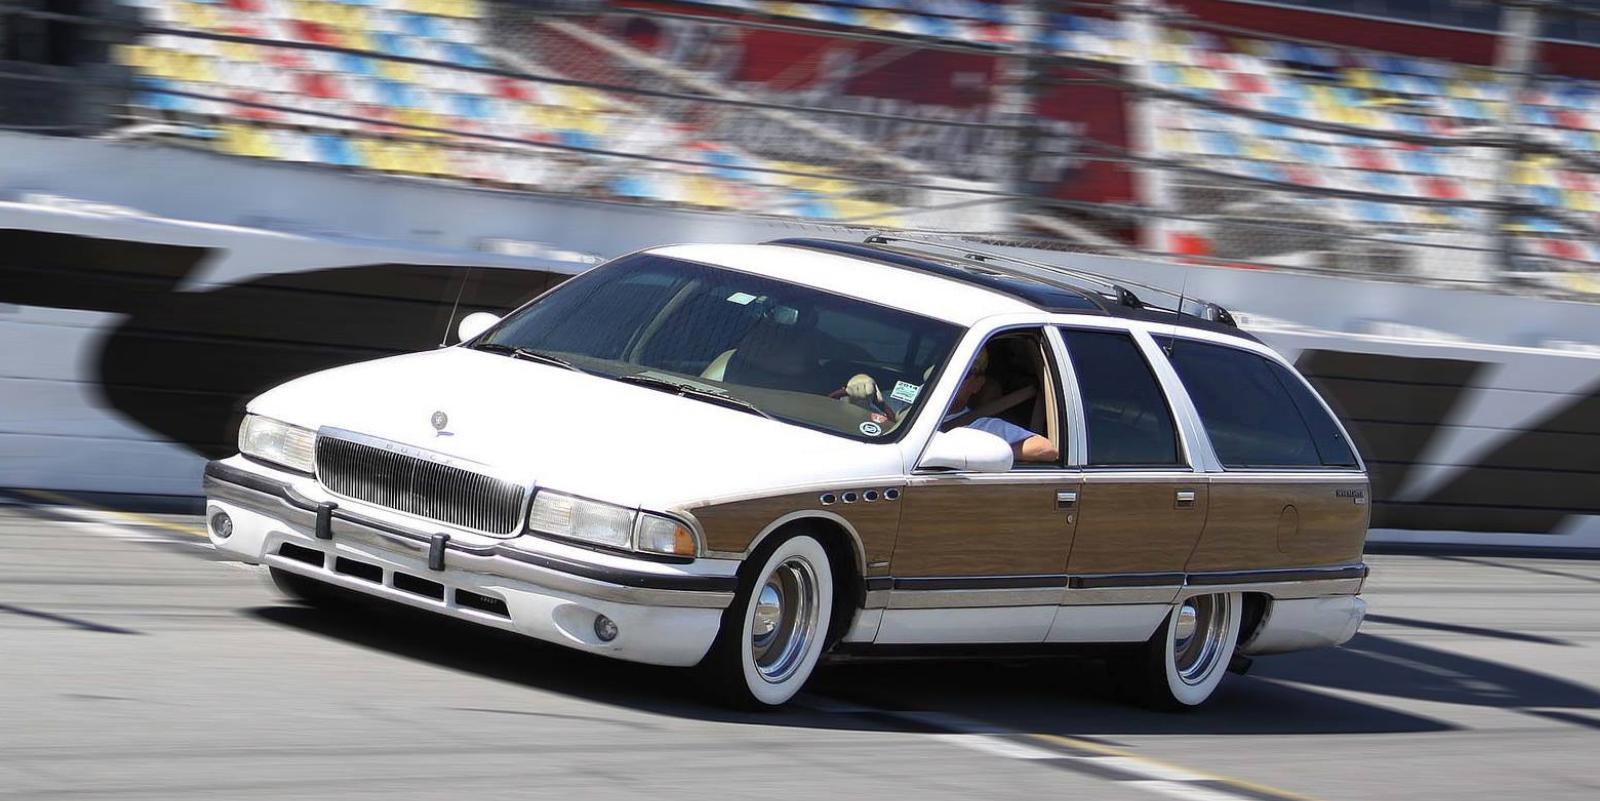 Amazing Buick Roadmaster Pictures & Backgrounds